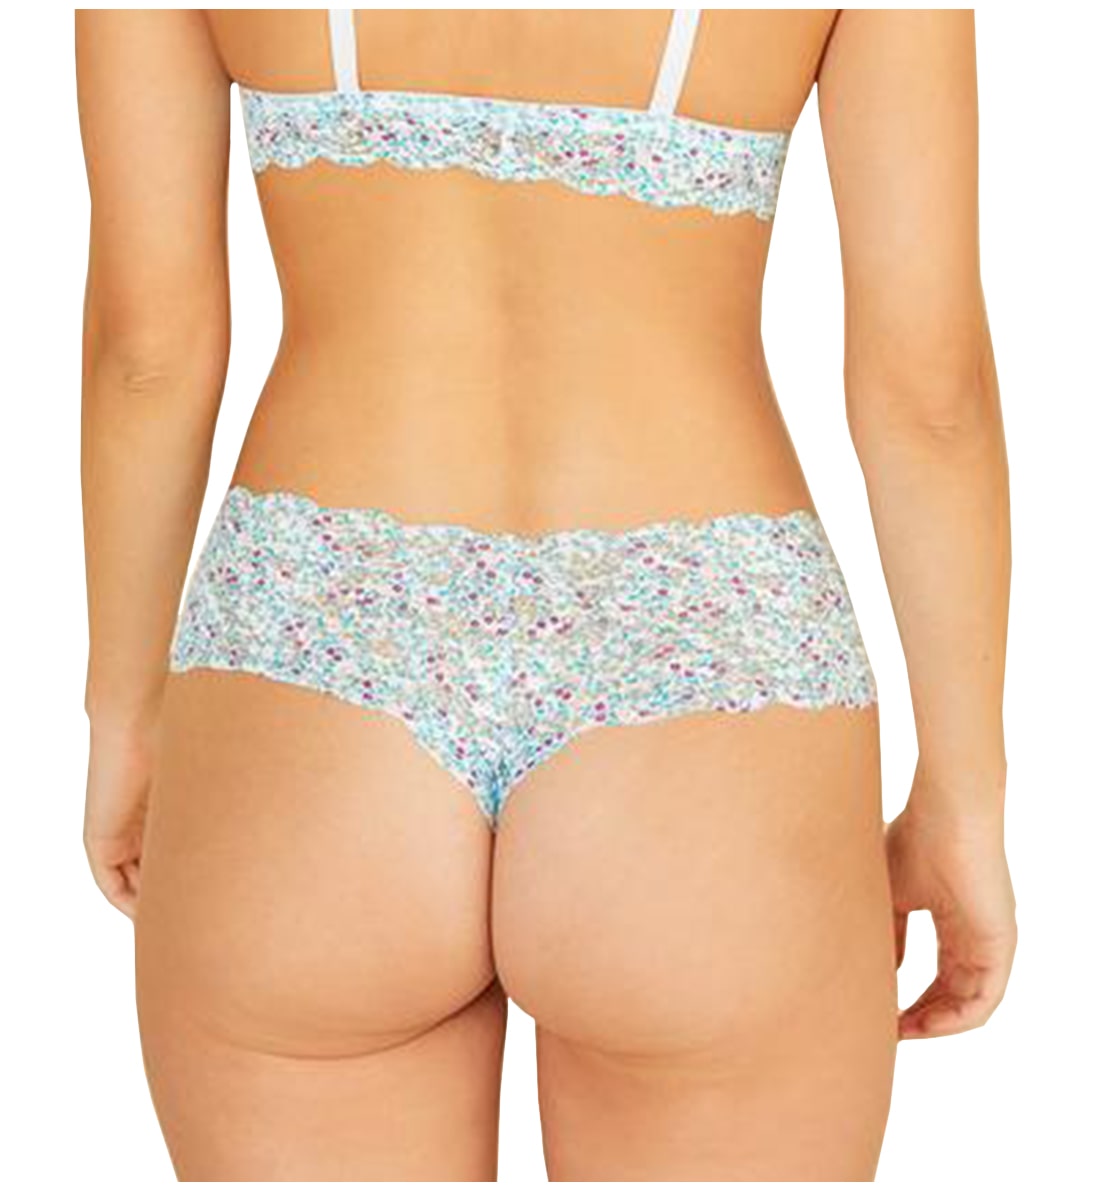 Cosabella Never Say Never Printed Comfie Thong (NEVEP0343),S/M,Floral Blu Venezia - Floral Blu Venezia,S/M